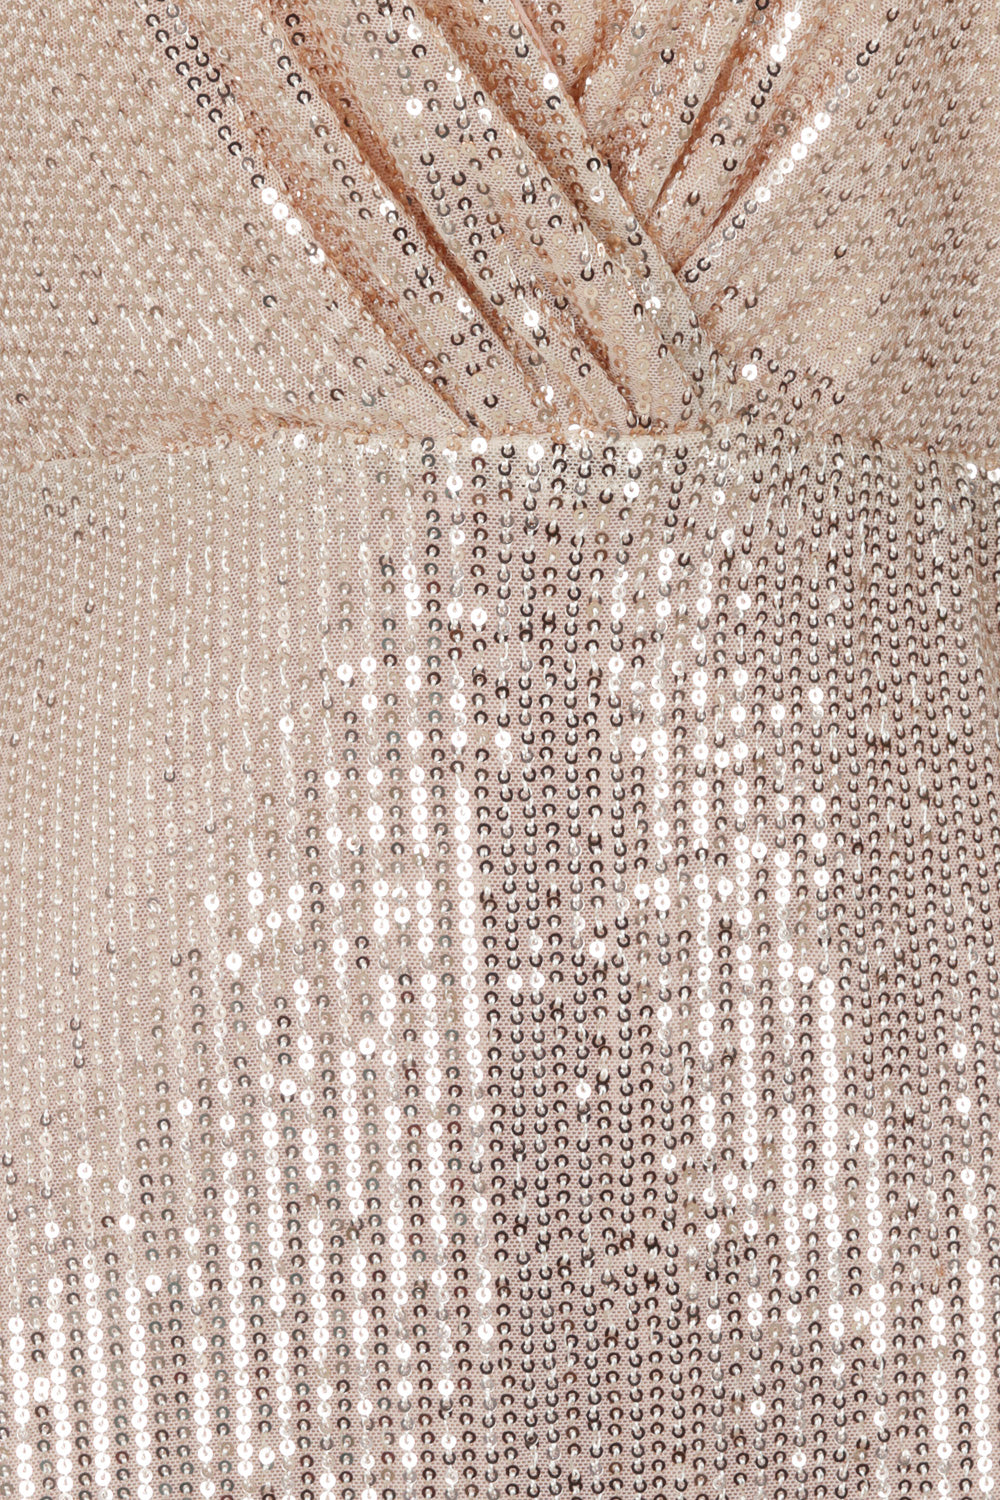 The One Rose Gold Sequin Plunge Backless Maxi Dress